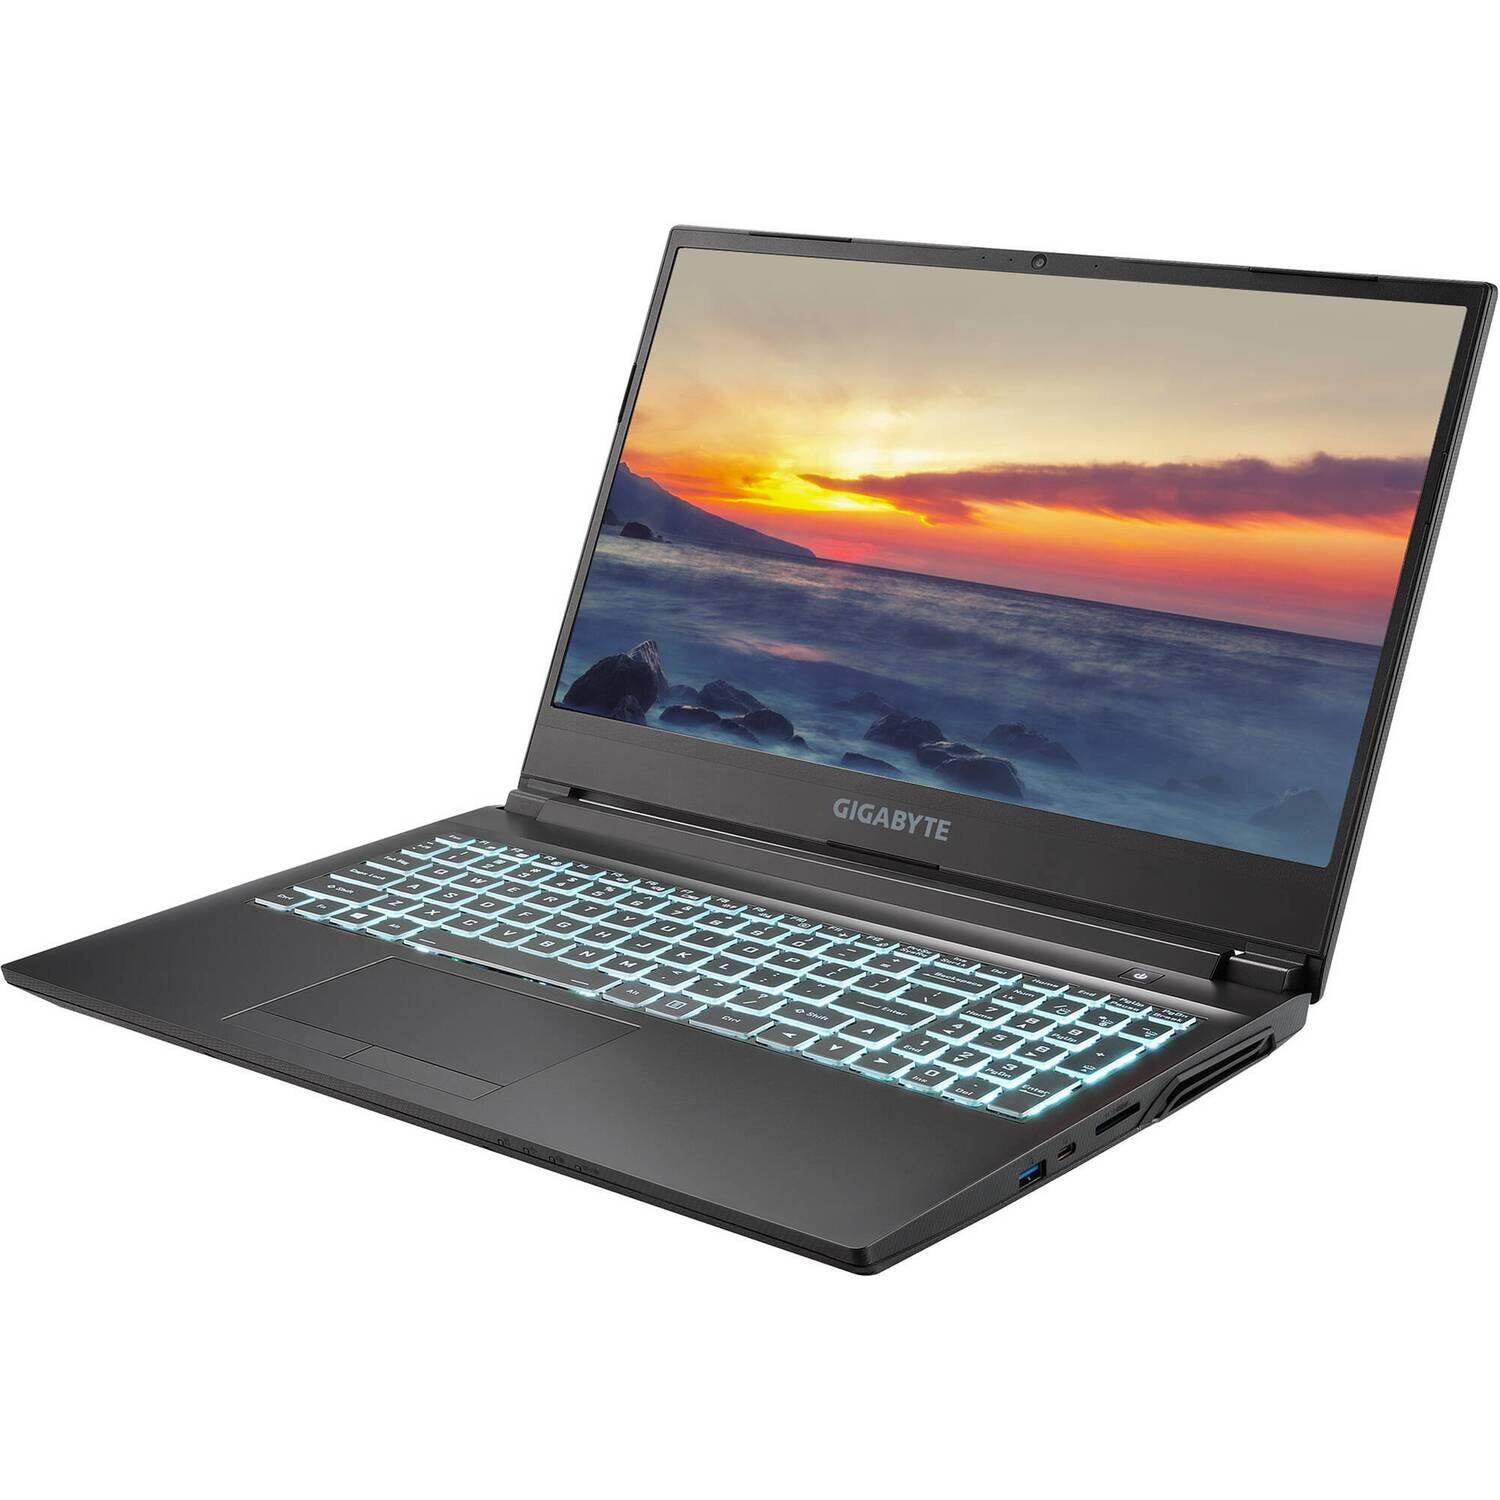 GIGABYTE Notebook G5 KD 15.6in (1920x1080@144Hz) IPS, Intel Core i5-11400H, 16GB (2x8GB) DDR4 3200MHz, 512GB M.2 SSD (1x M.2 slot free, 1x 2.5" slot free), NVIDIA GeForce RTX 3060P, No Os